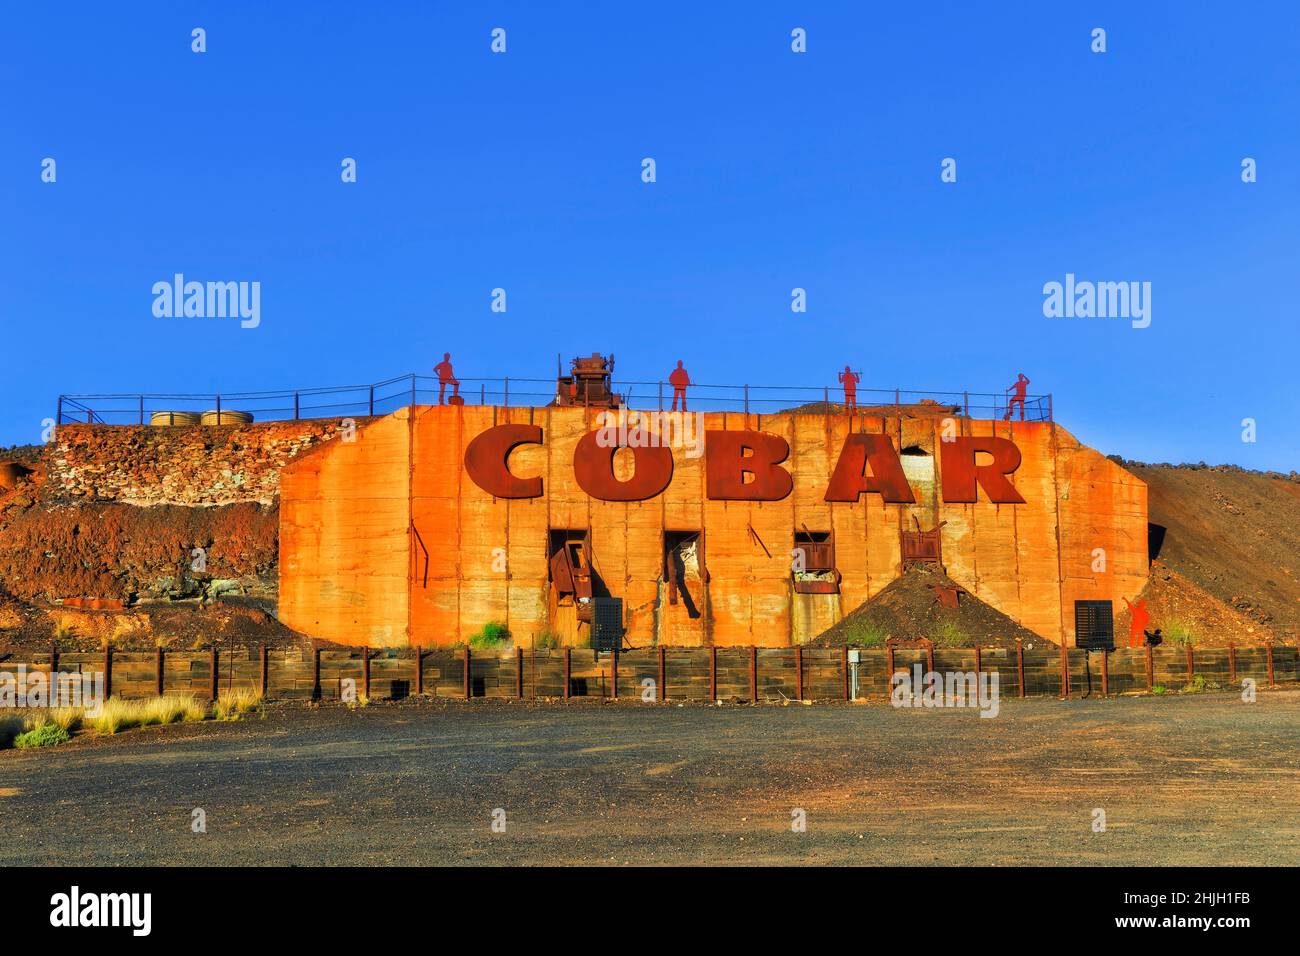 Cobar, Australia - 30 Dec 2021: Welcome to Cobar mining town in Australian outback - historic road sign. Stock Photo